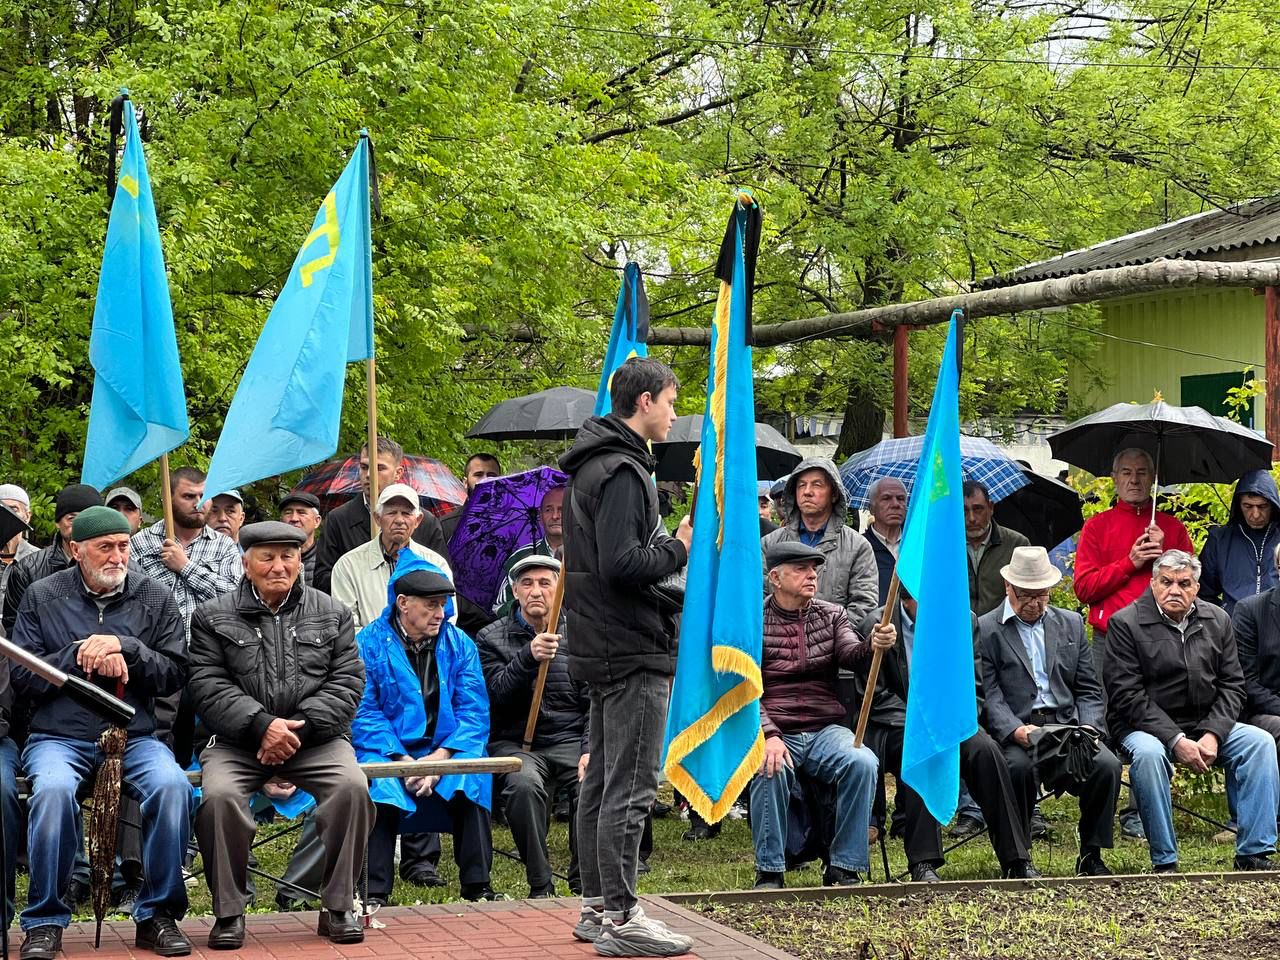 About seventy people in the Crimean capital have defied official warnings to commemorate the victims of Stalin’s mass deportation of the Tatar people in 1944.